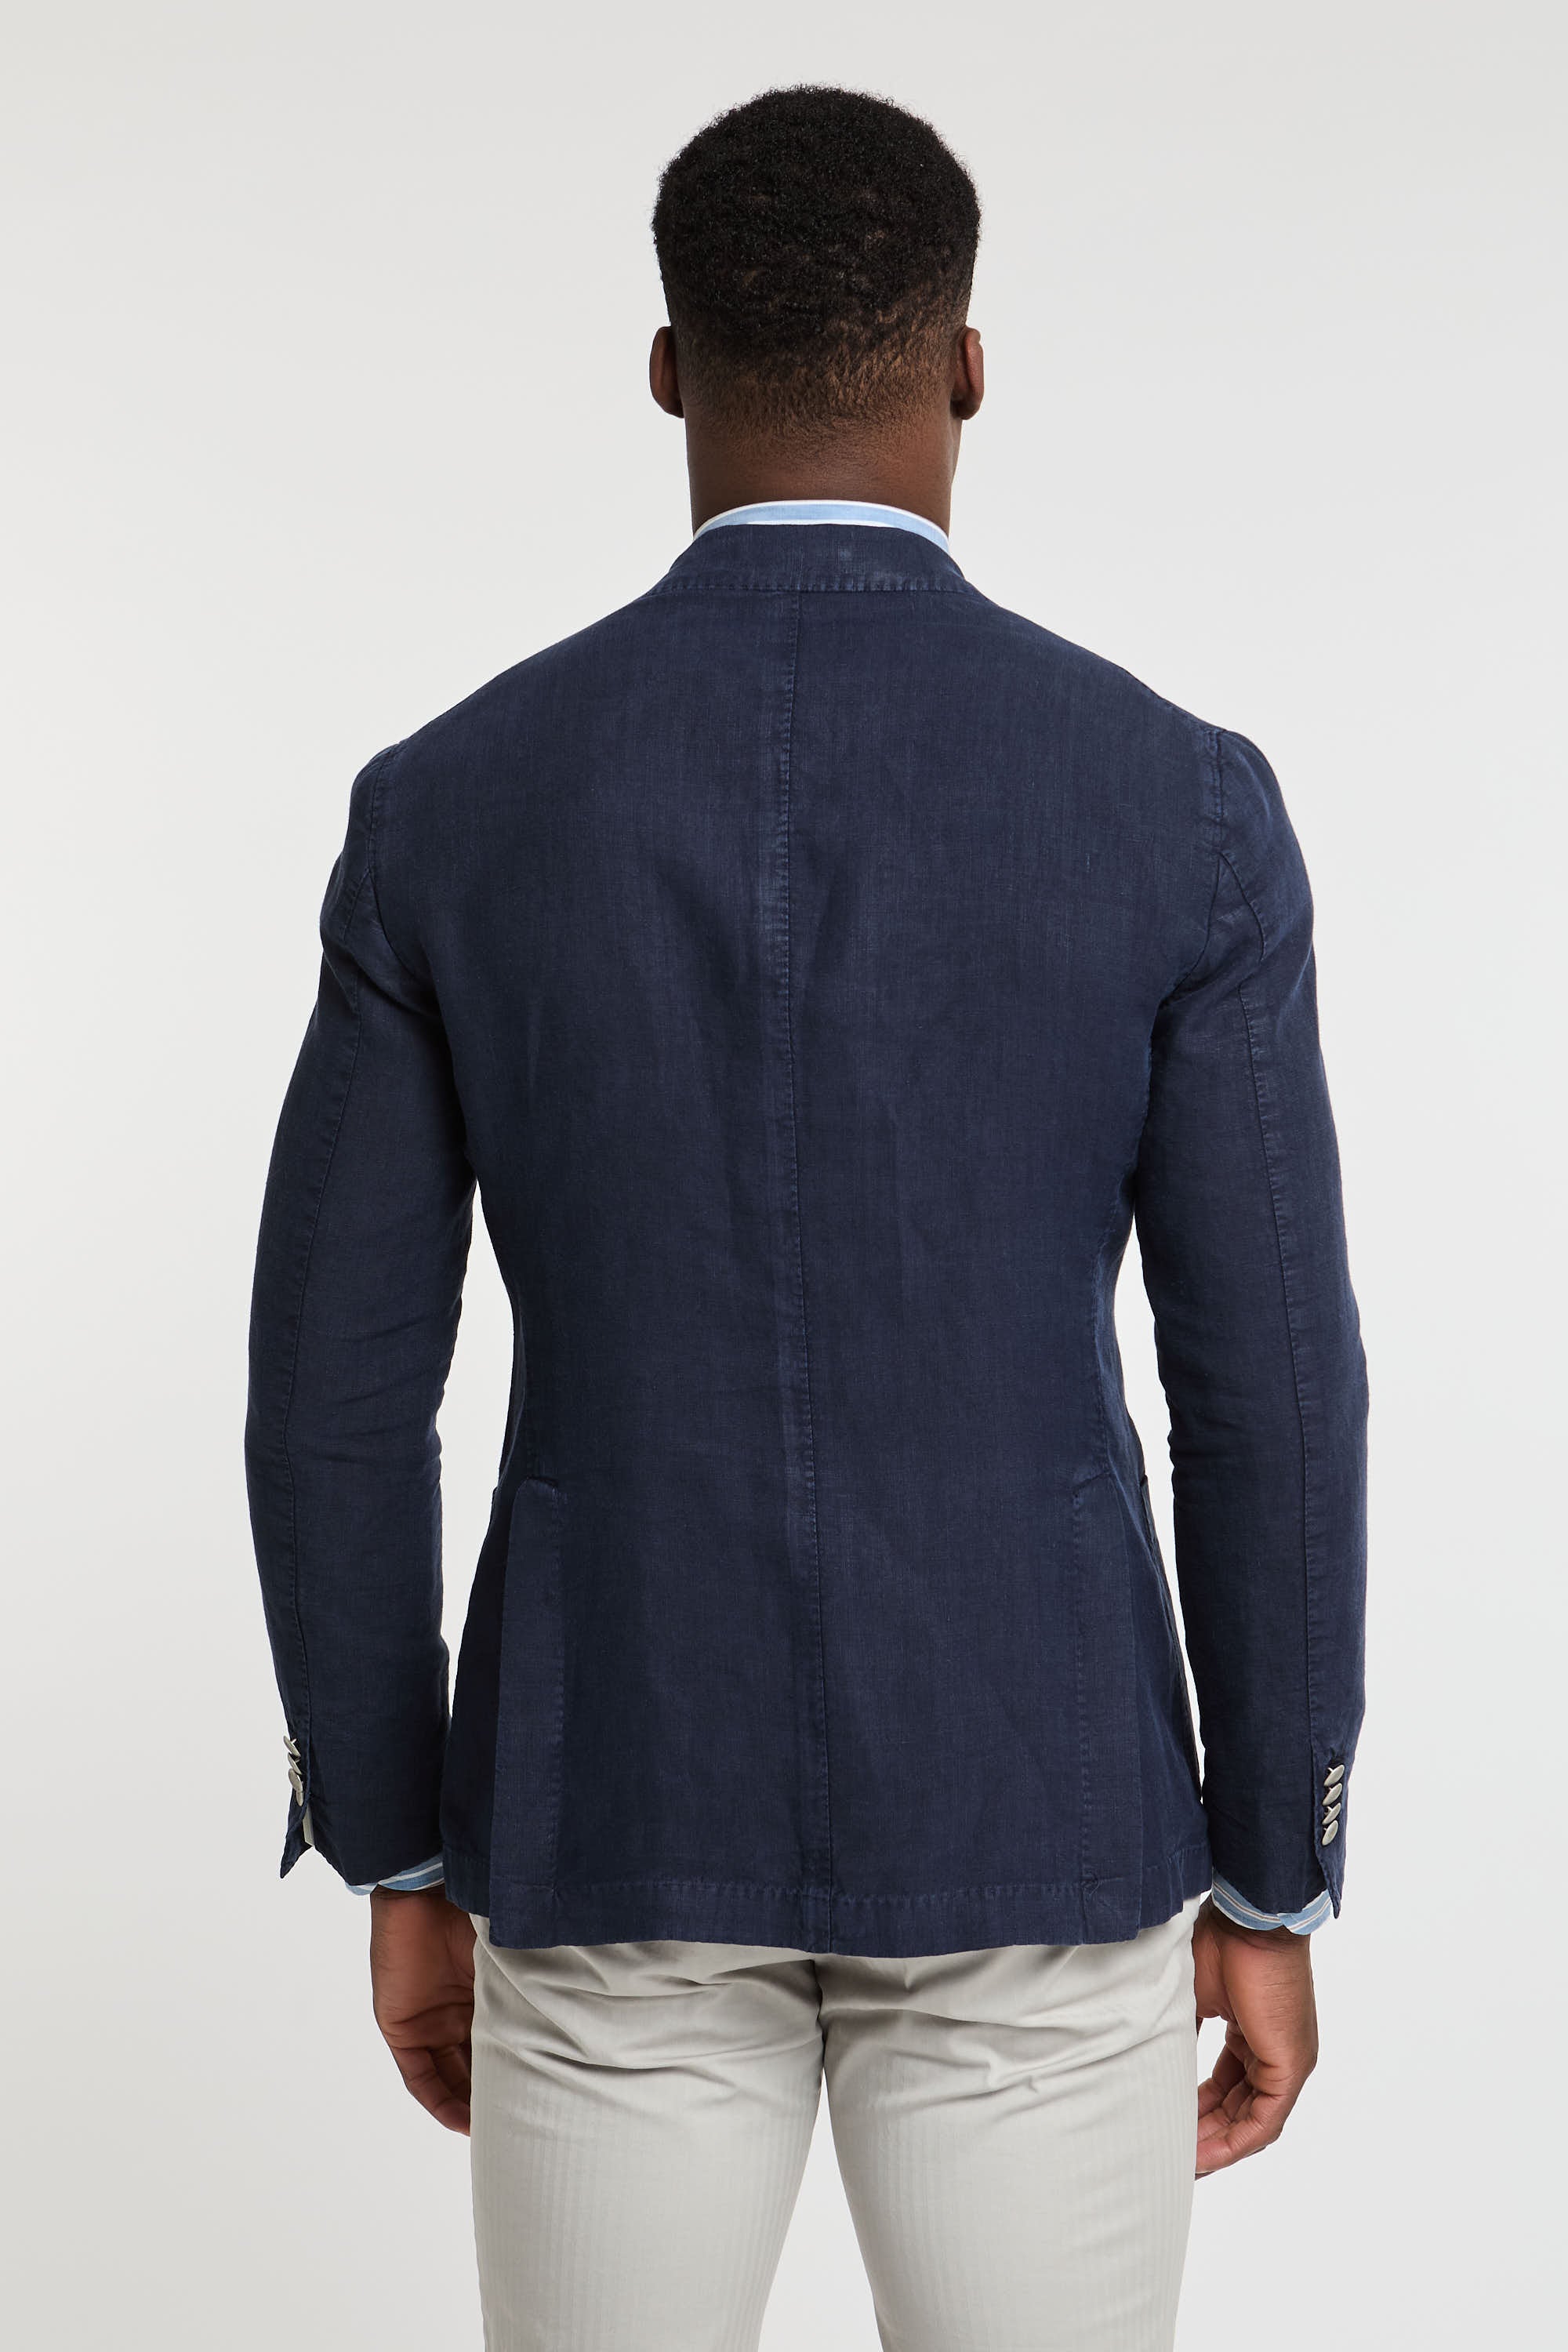 L.B.M. 1911 Double-Breasted Linen Blue Jacket-6